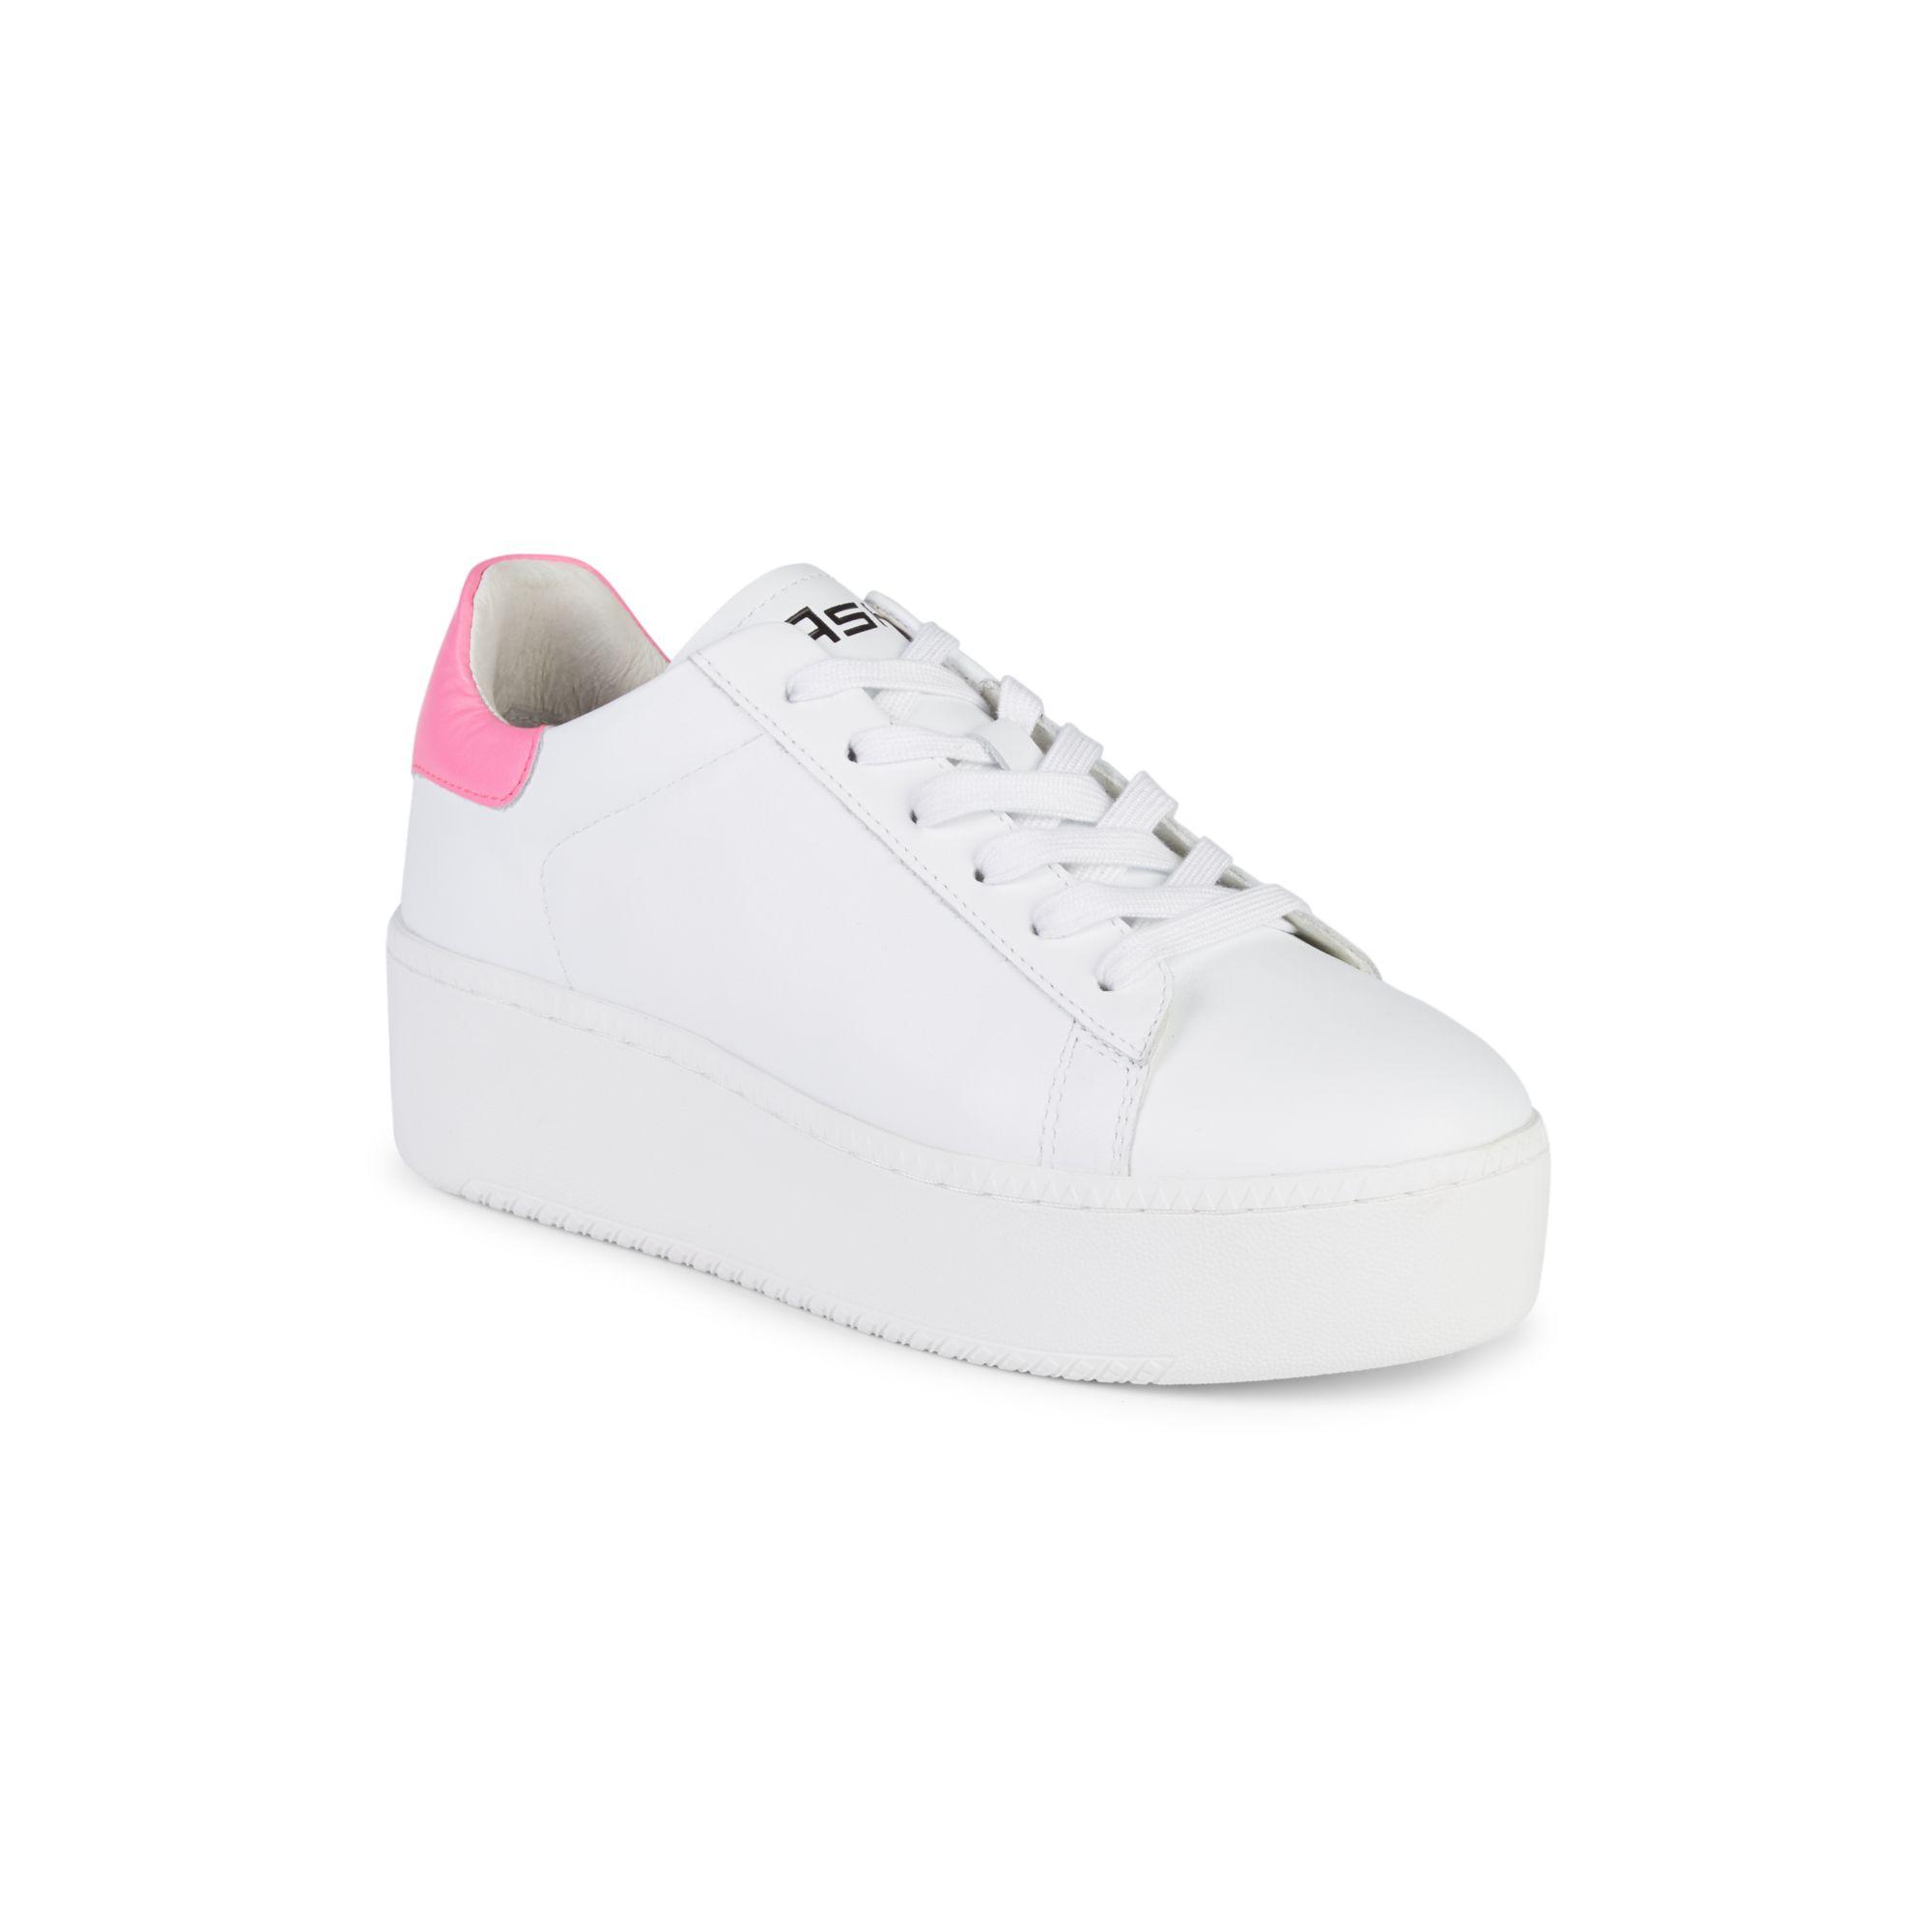 Ash Cult Leather Platform Sneakers in White Pink (White) - Lyst